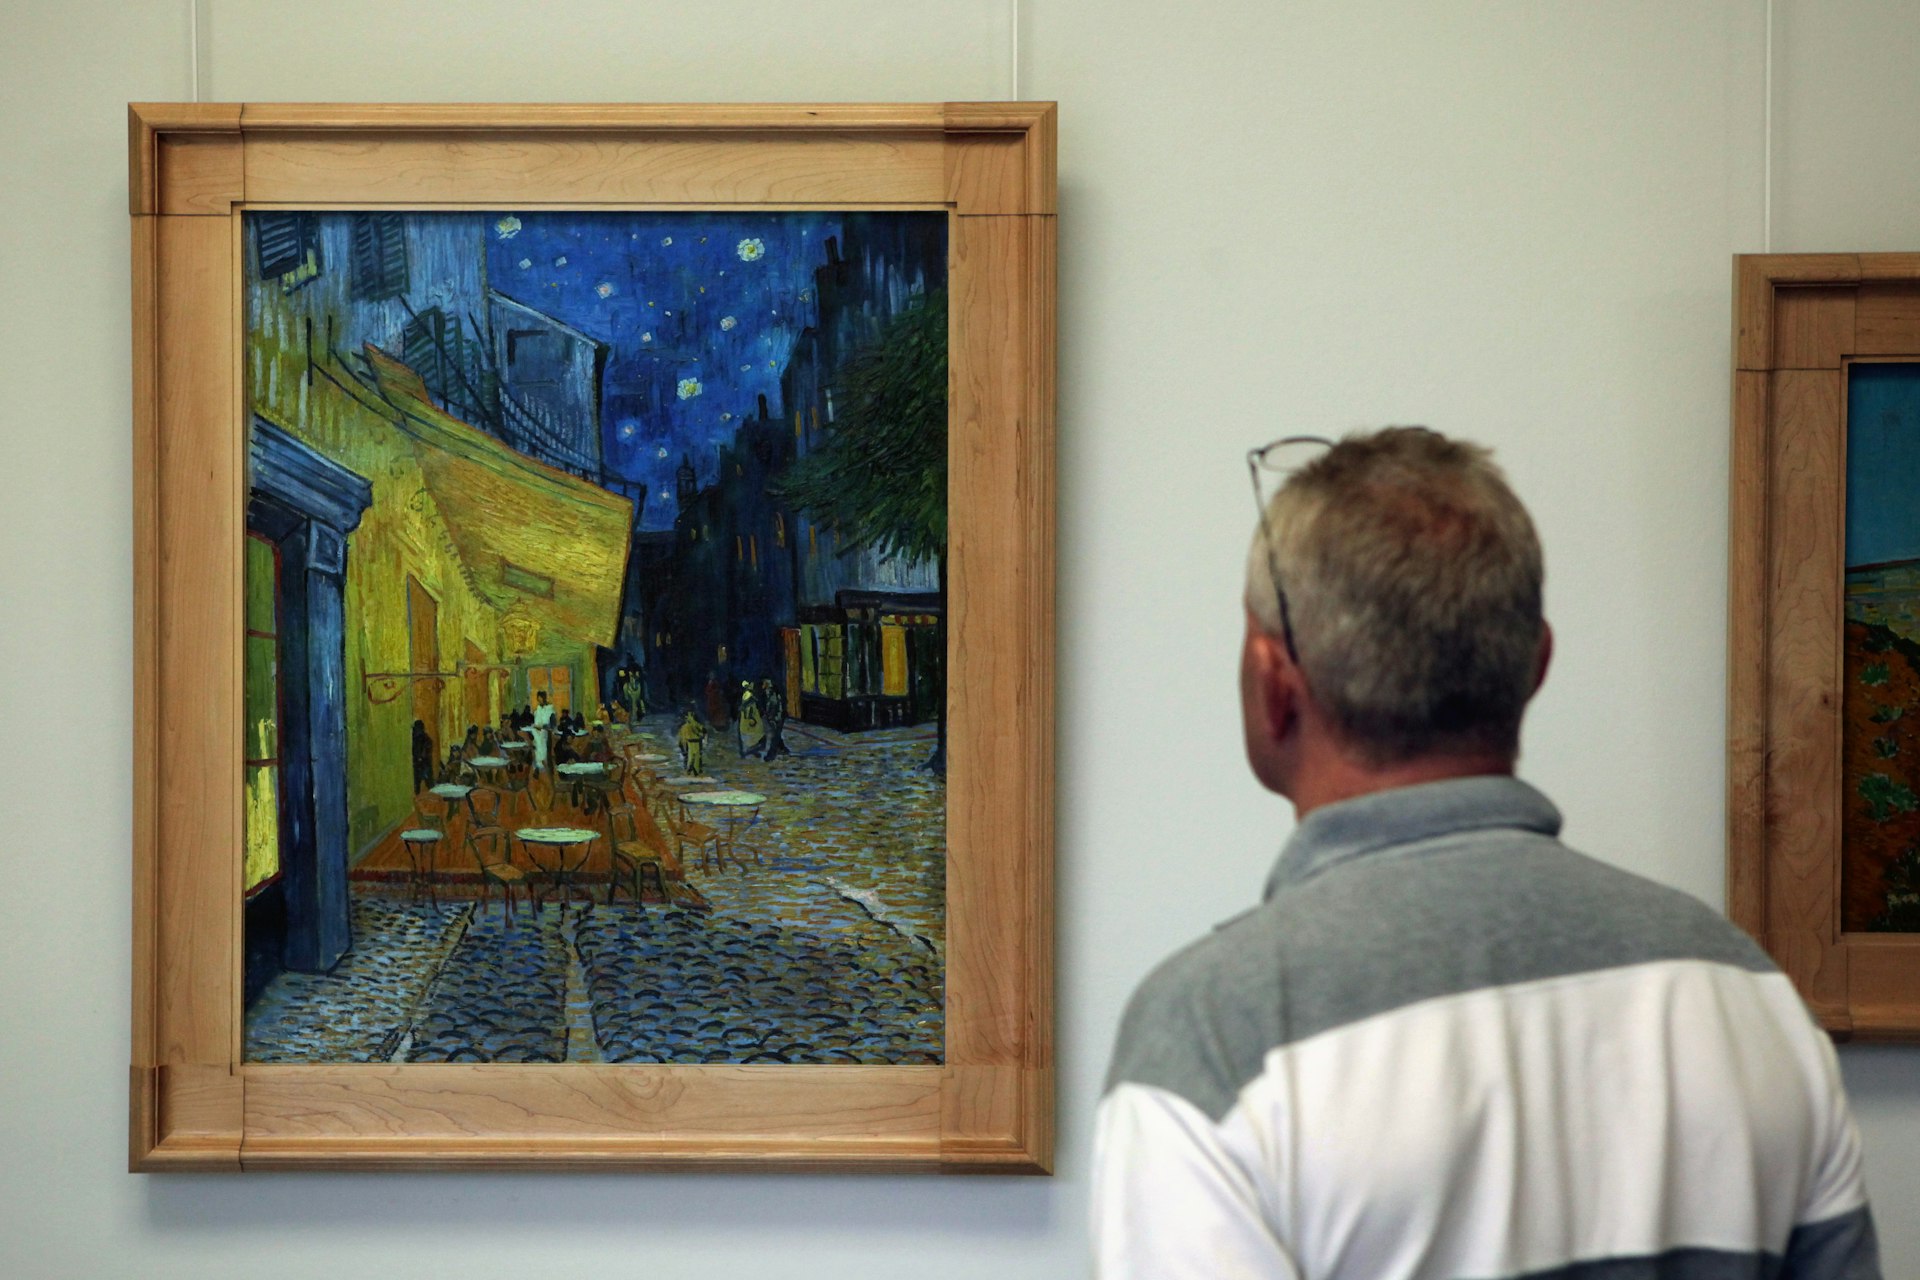 A man stands and looks at a framed painting hanging on a wall of people outside a cafe at night